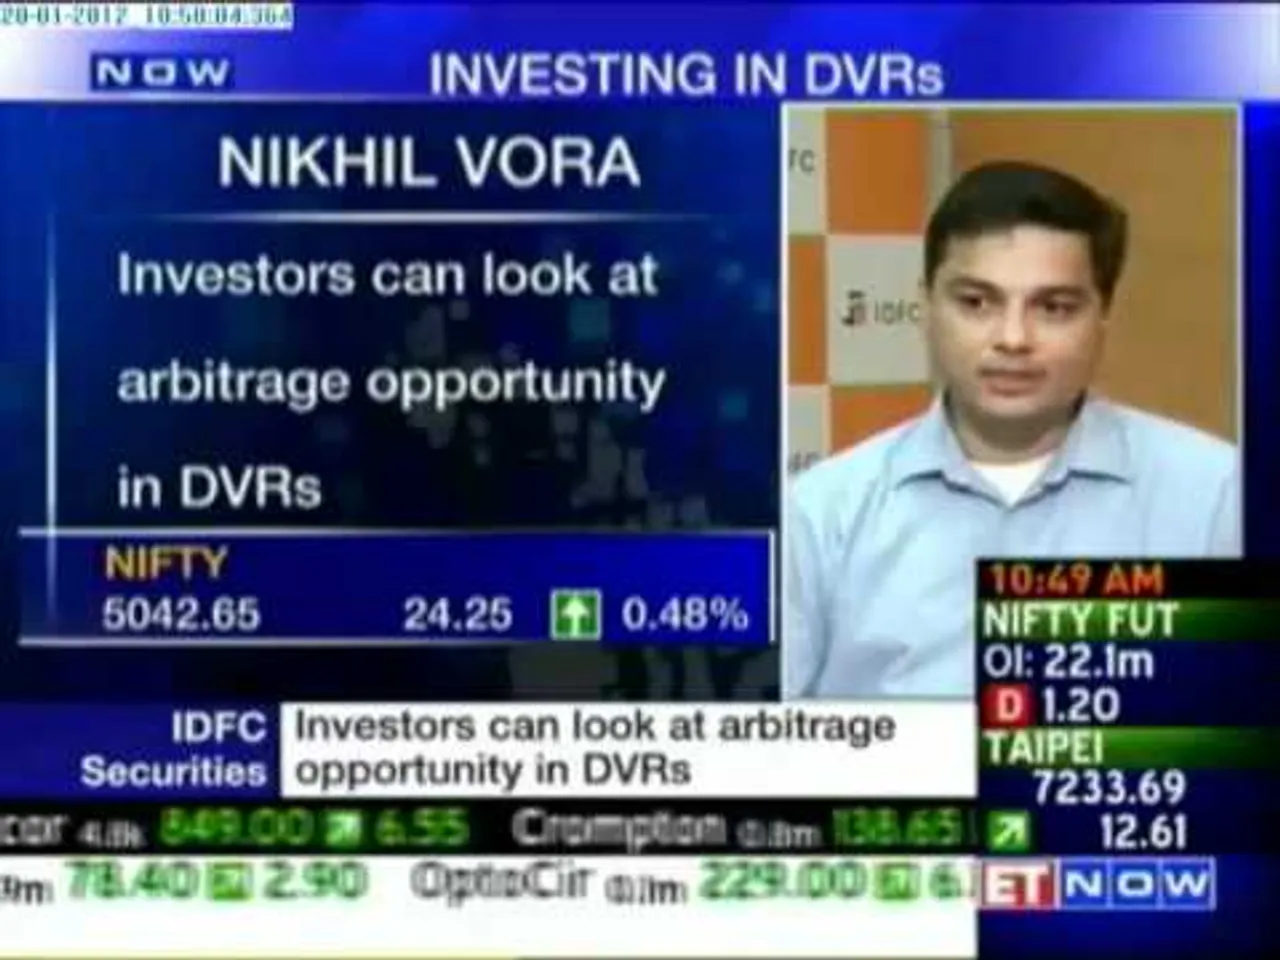 Early One97 Communications investor Nikhil Vora sells his stake to Alibaba